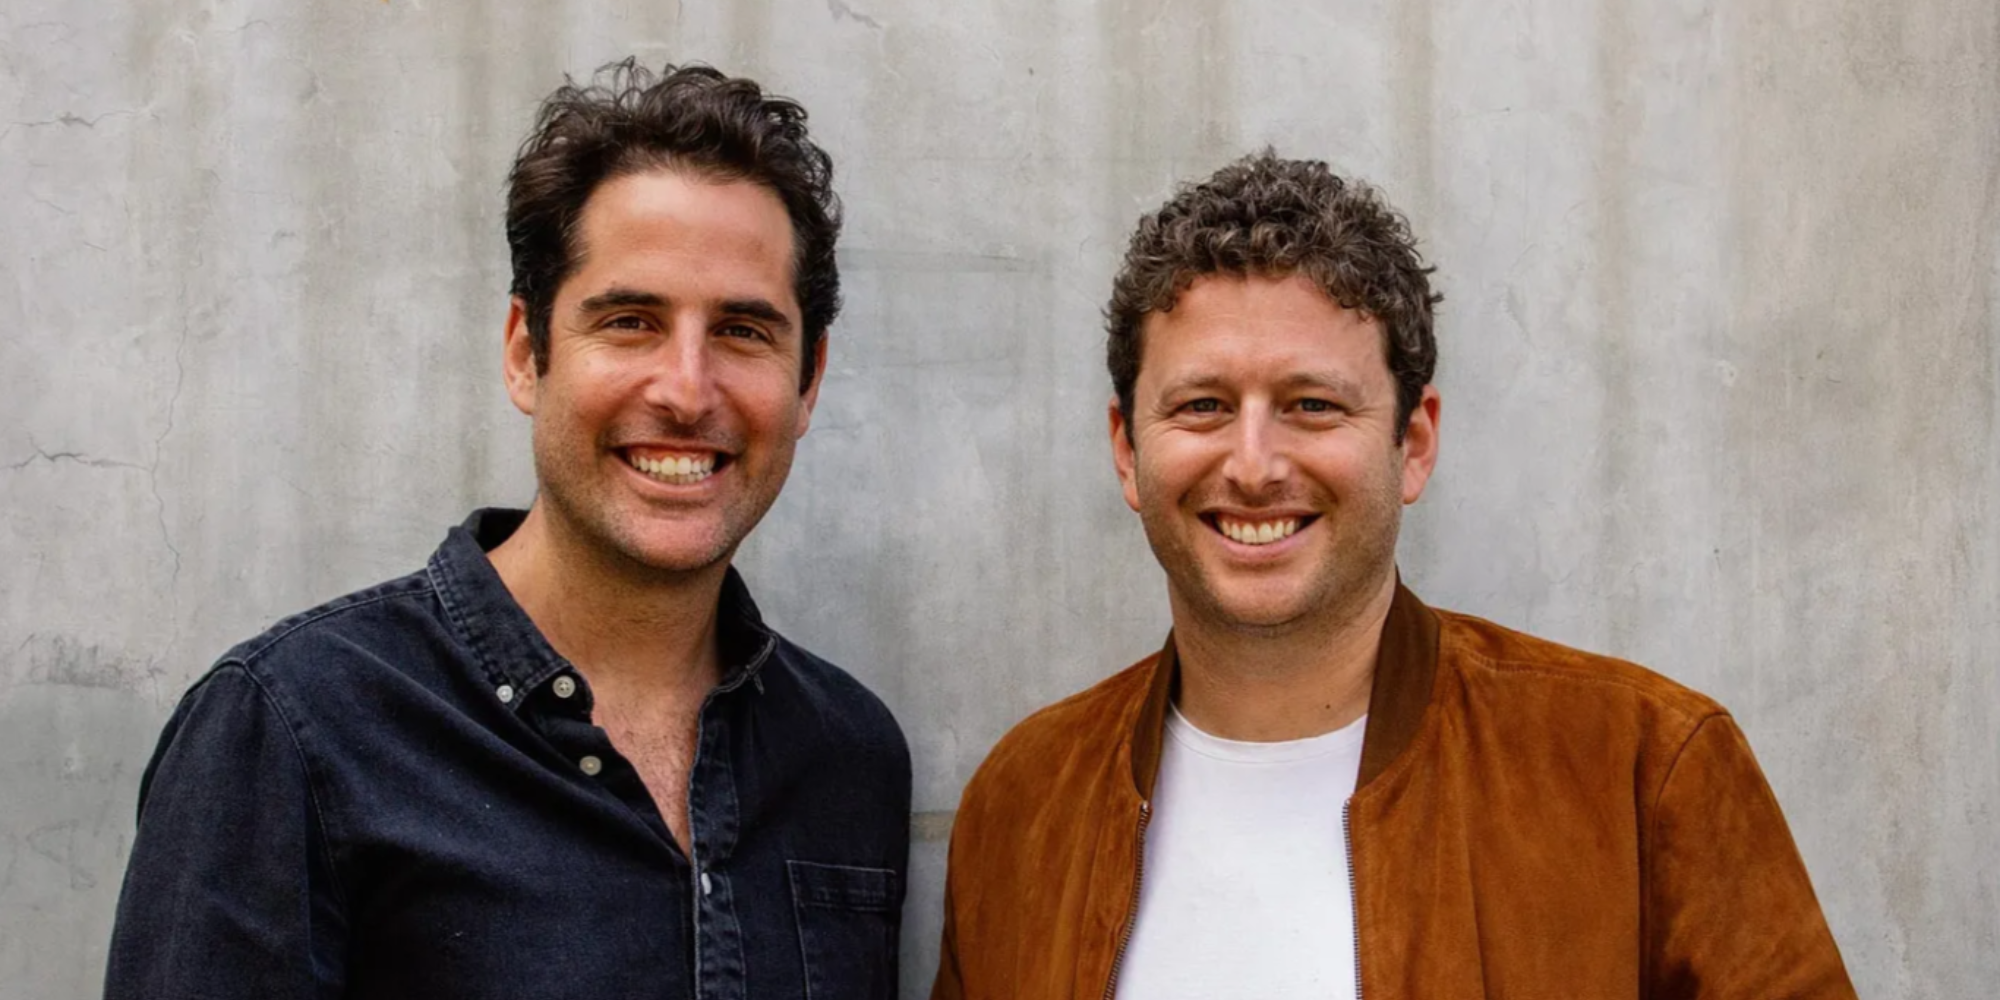 Hatch co-founders Adam Jacobs and Chaz Heitner